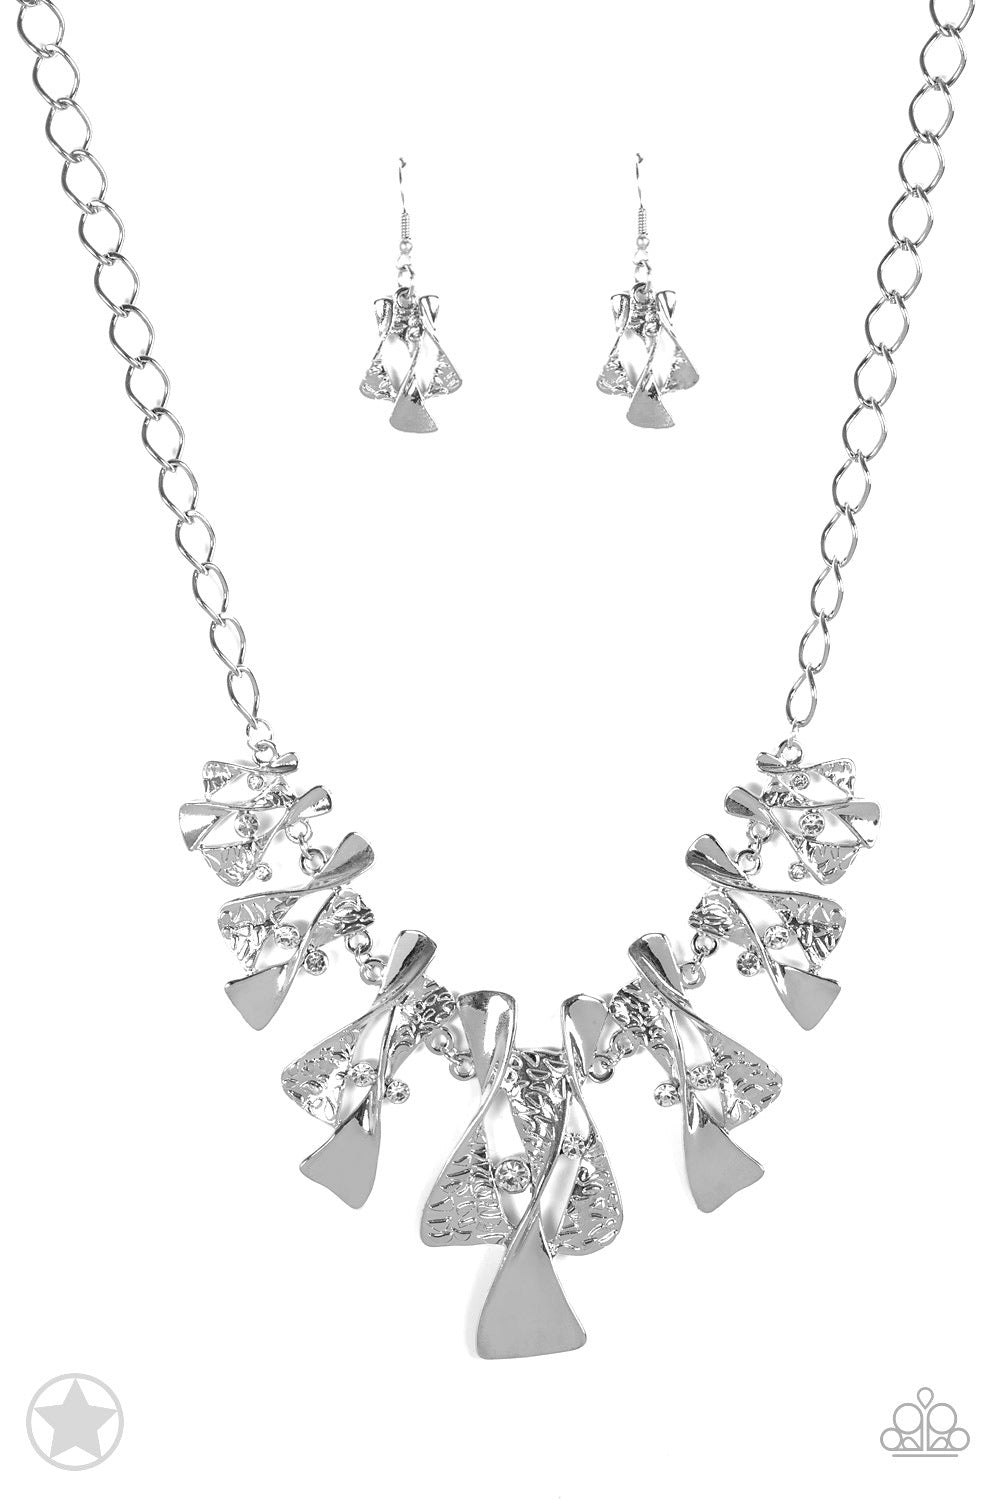 The Sands of Time - Silver Necklace - Paparazzi Accessories